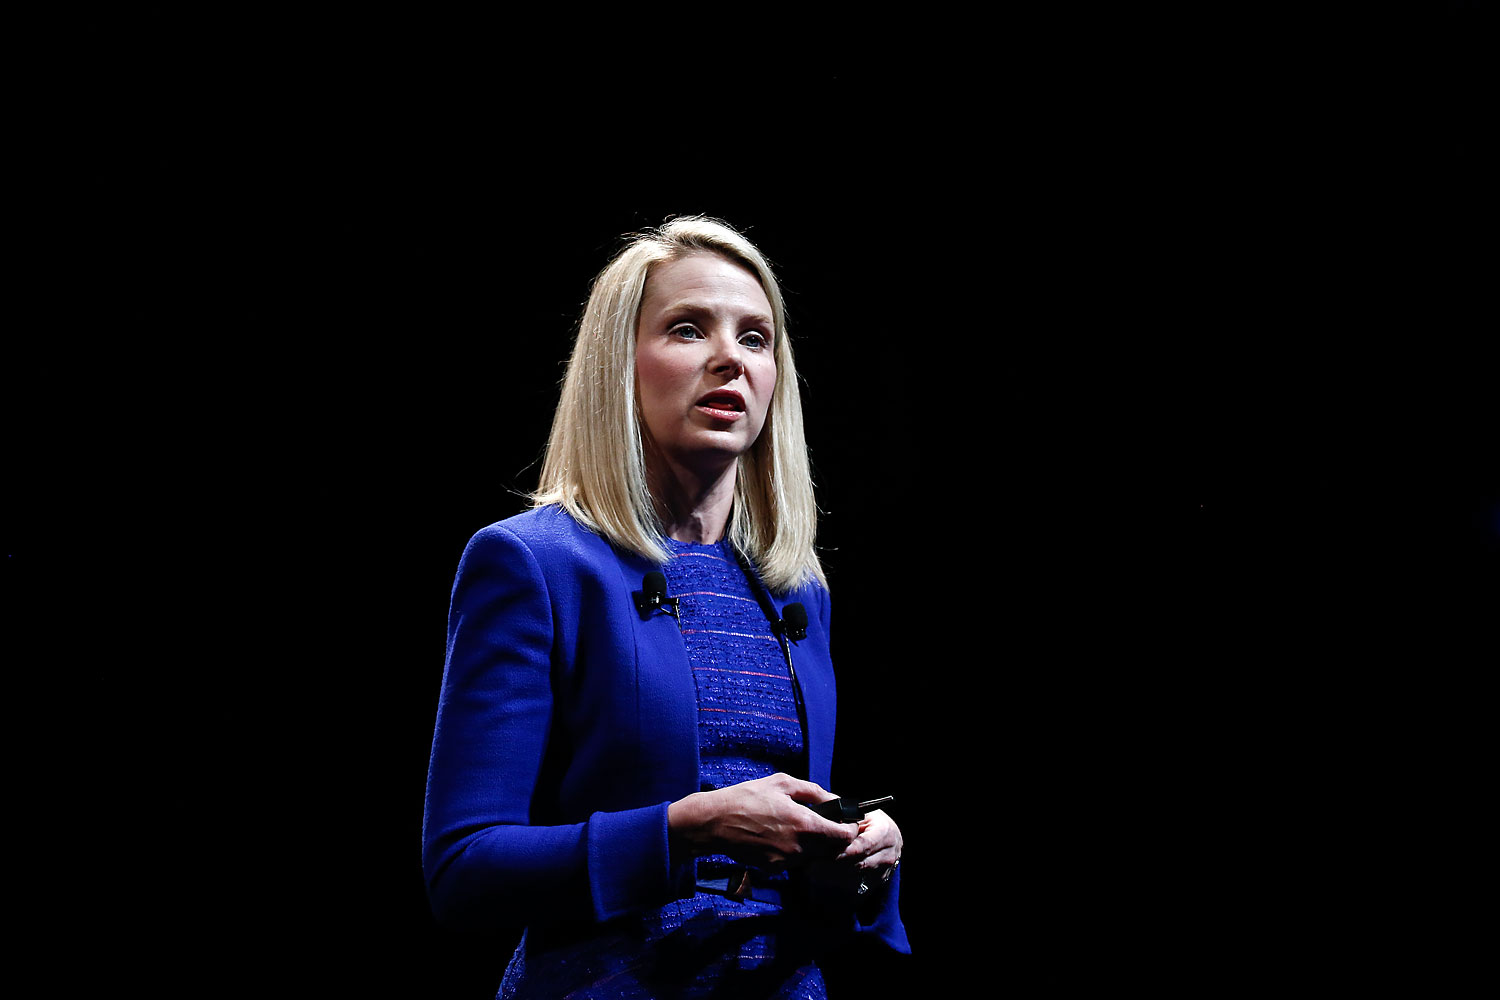 Marissa Mayer, chief executive officer of Yahoo! Inc., speaks at the Cannes Lions International Festival Of Creativity in Cannes, France, on Tuesday, June 17, 2014. (Simon Dawson—Bloomberg/Getty Images)